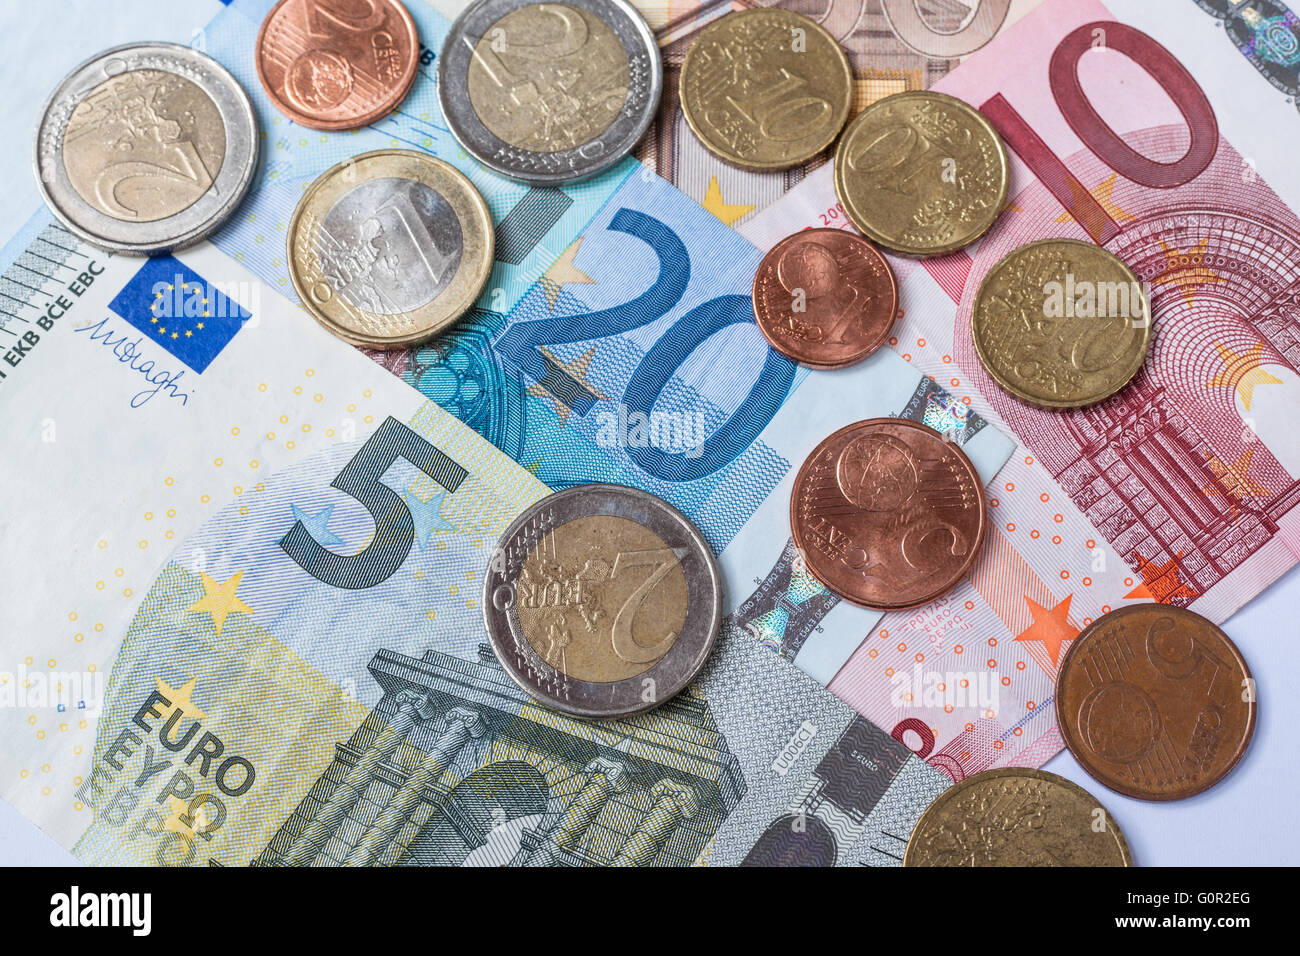 Banknotes and coins of euro currency as background Stock Photo